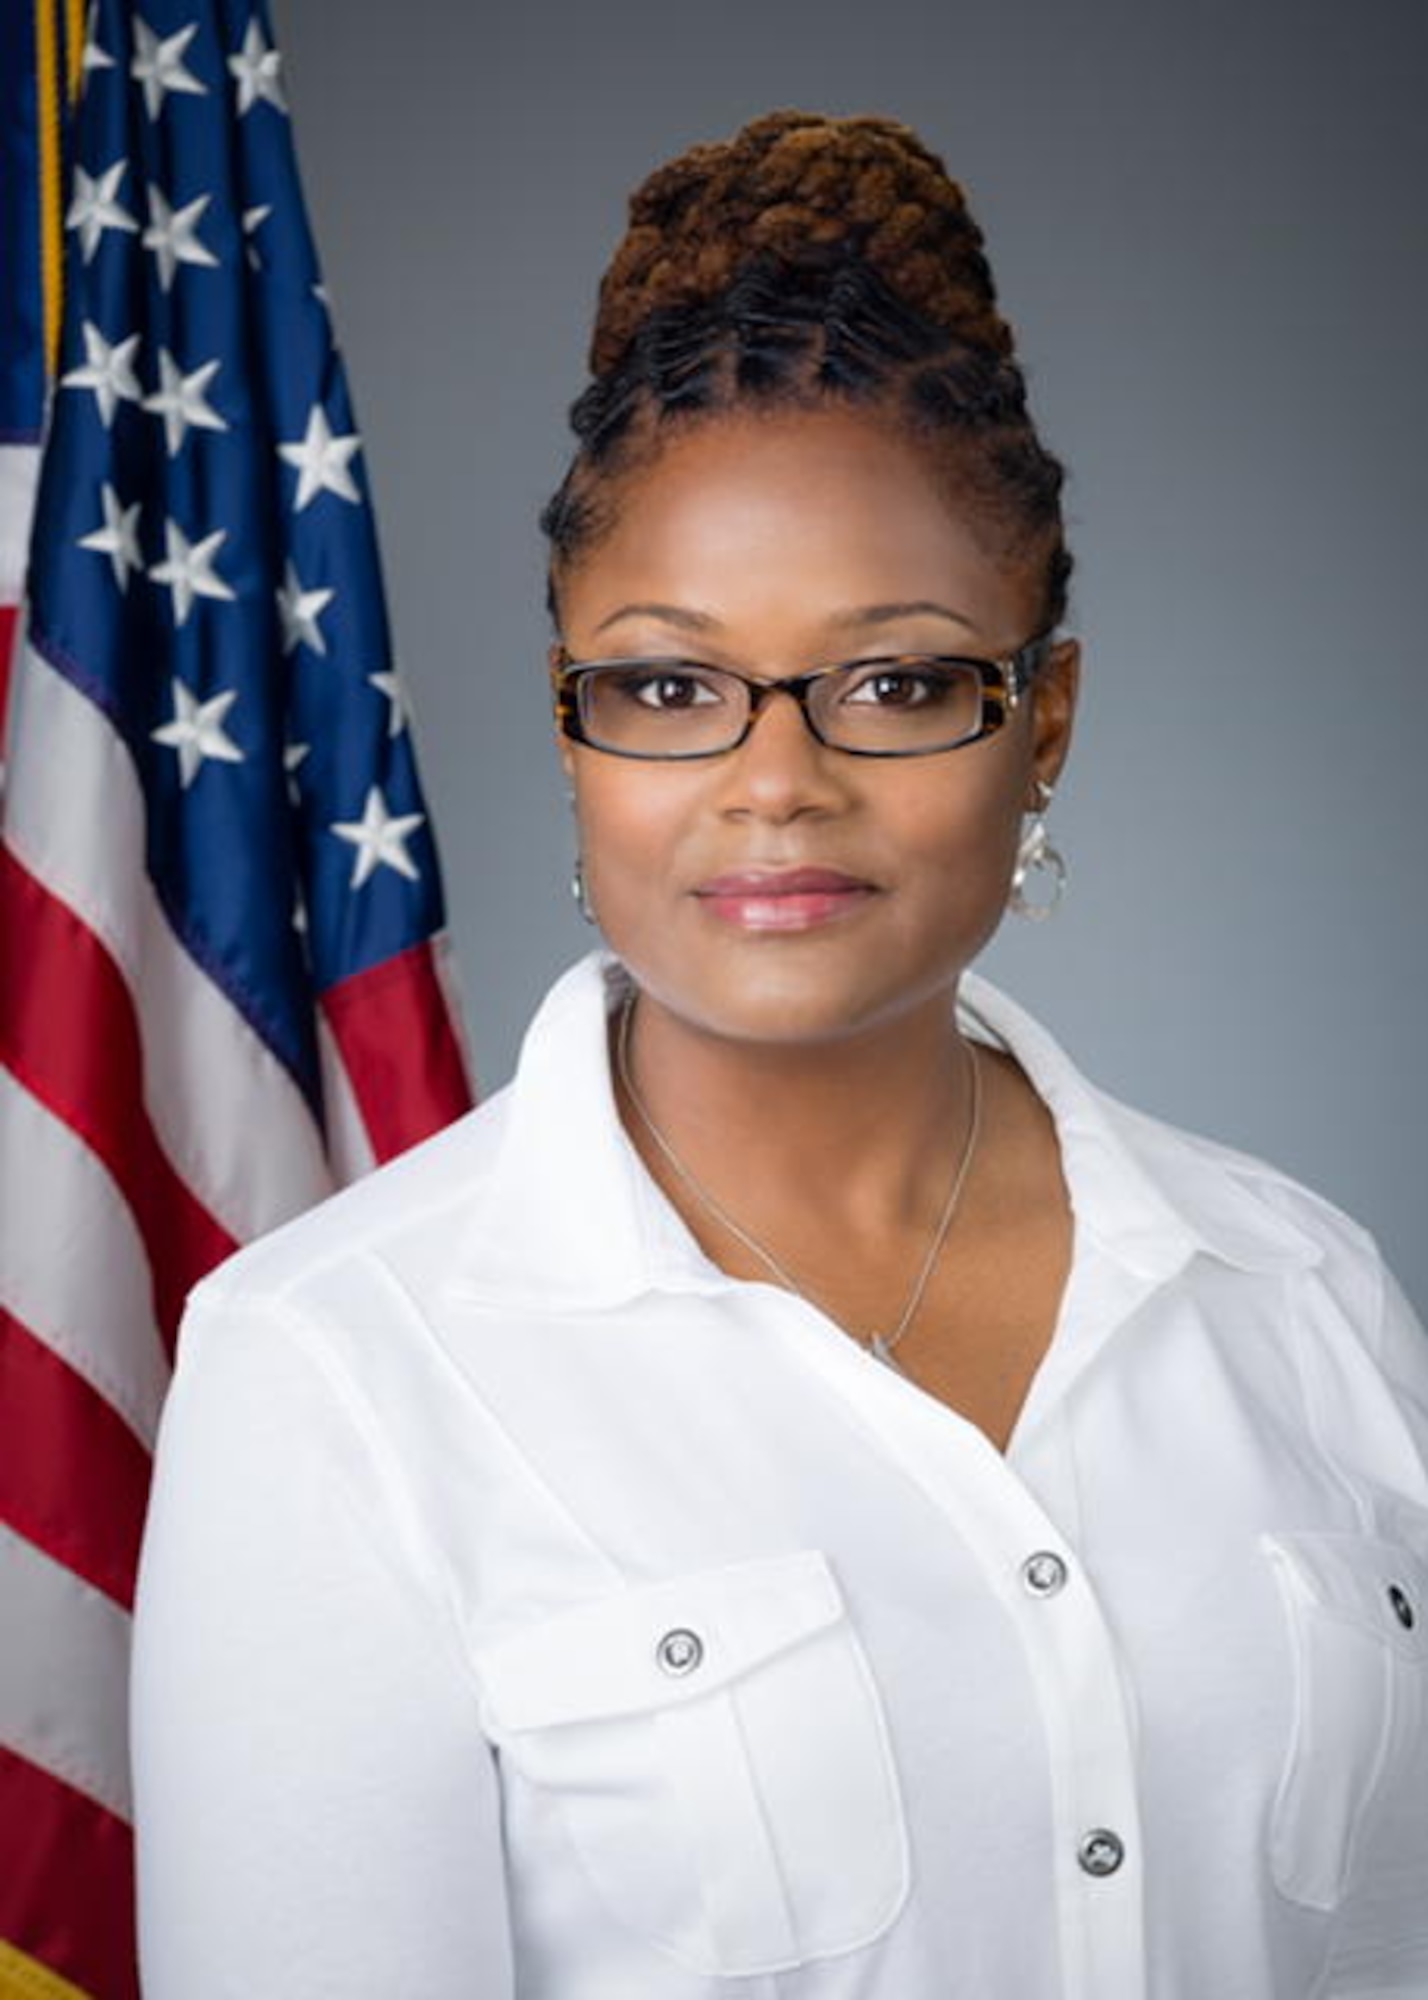 Professional studio photo of Westover’s Sexual Assault Response Coordinator Tamara Thompson, who is standing in front of an American flag.